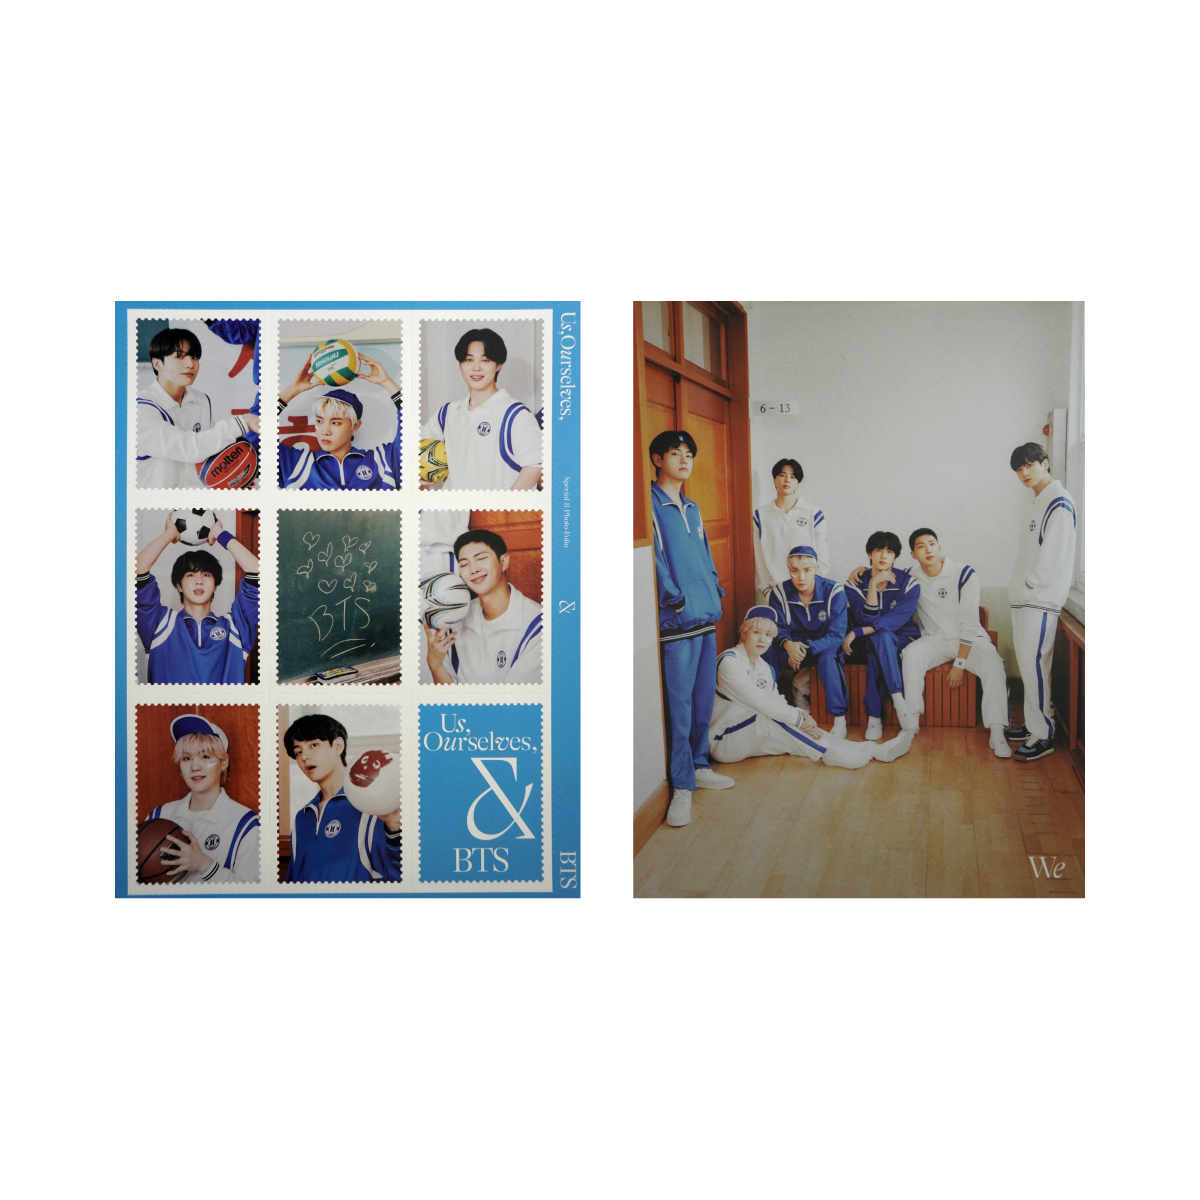 Special 8 Photo-Folio Us, Ourselves, and BTS 'WE' Mini Poster + Stamp